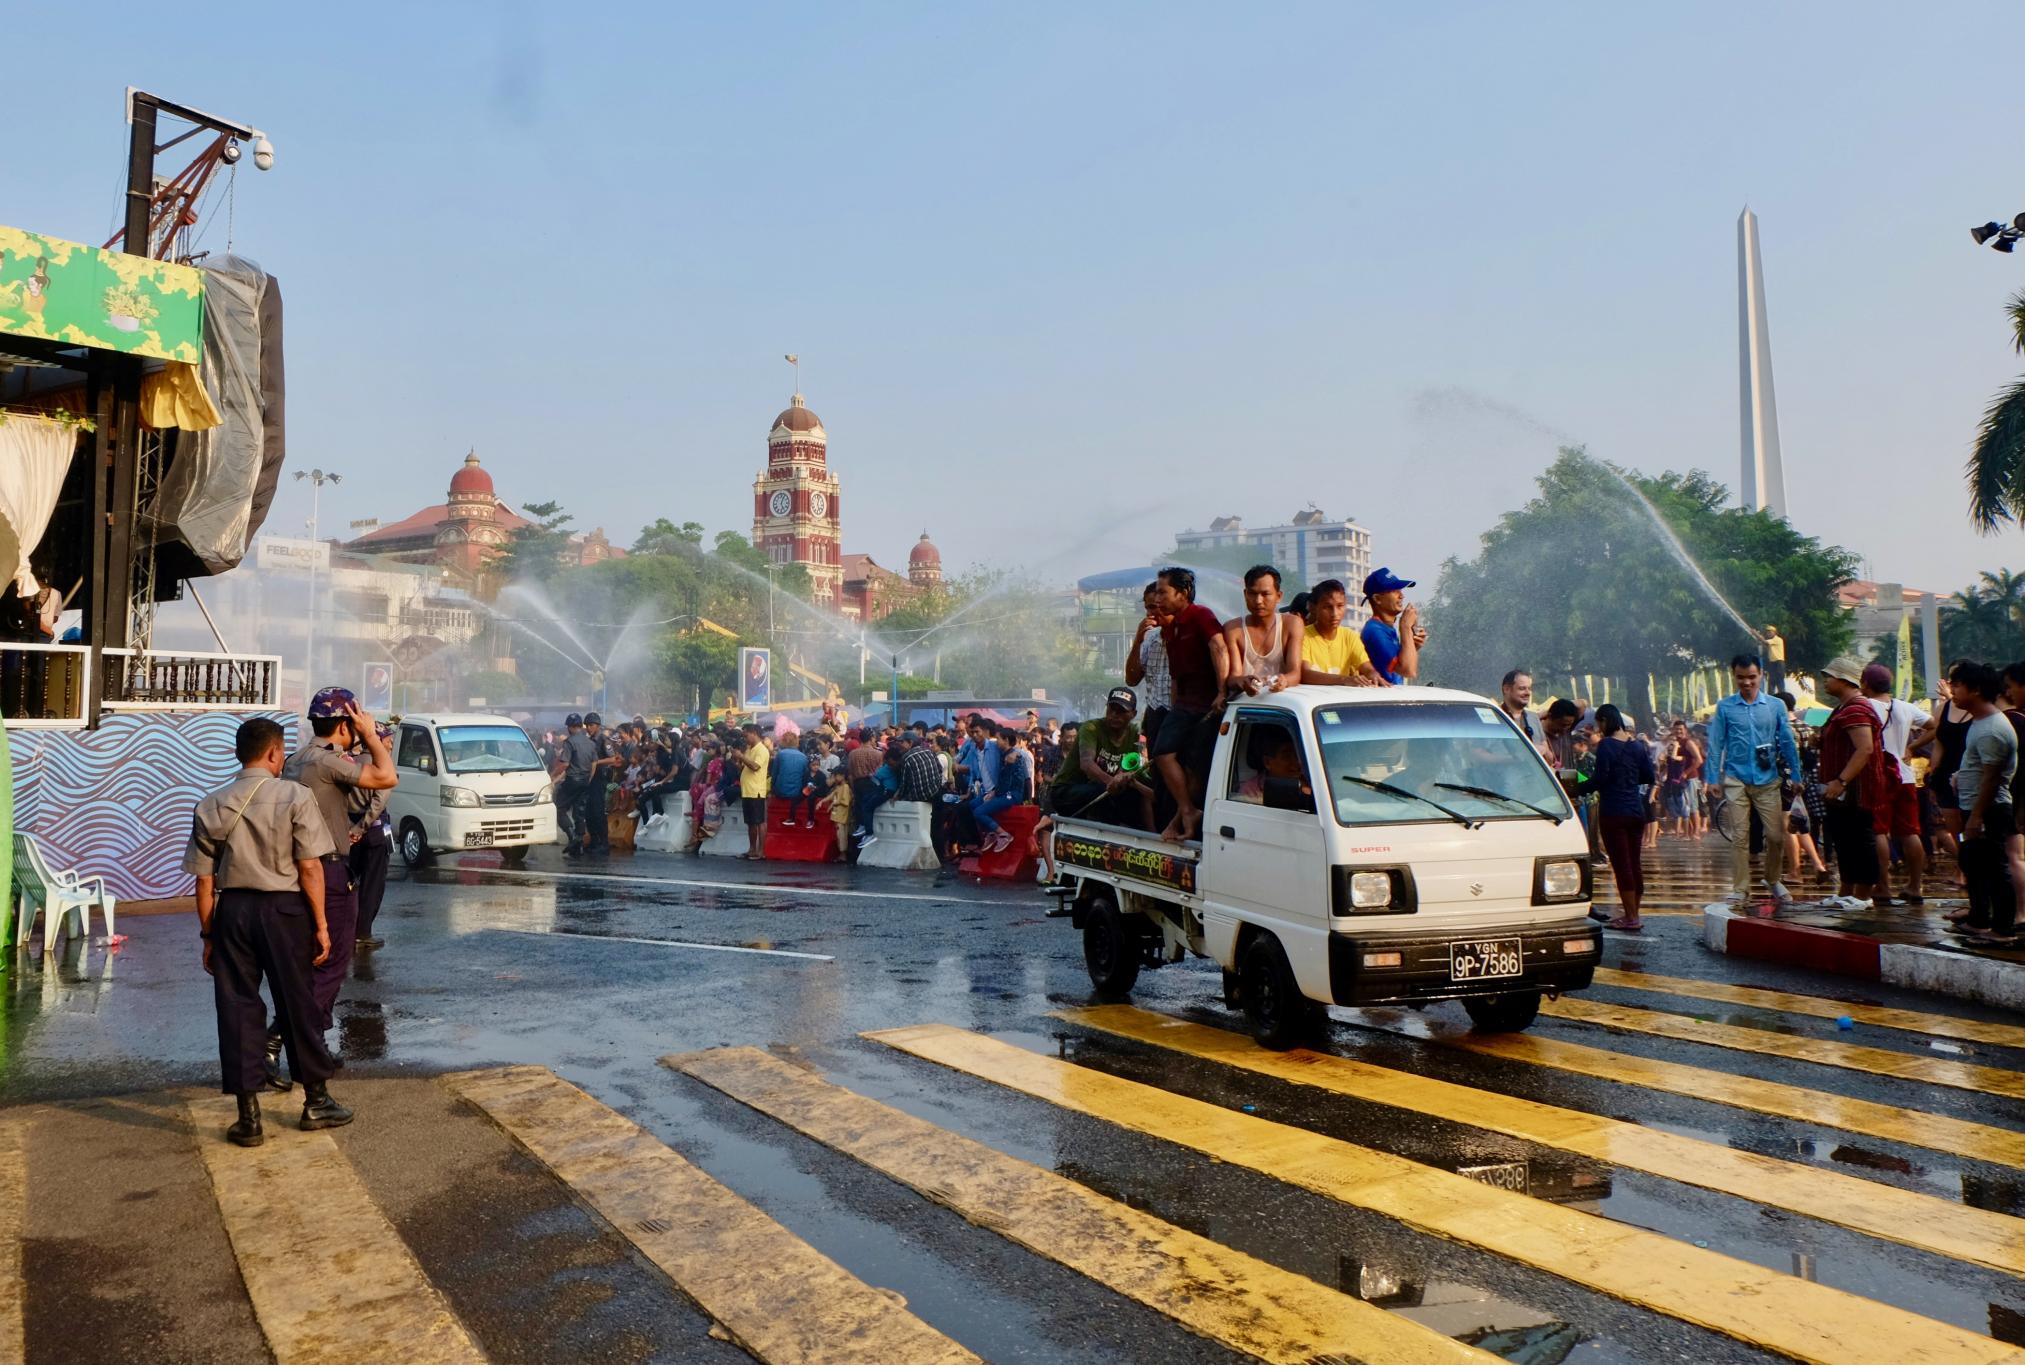 A truck gets hosed as it drives past a crowd in downtown Yangon. (Myanmar Mix)